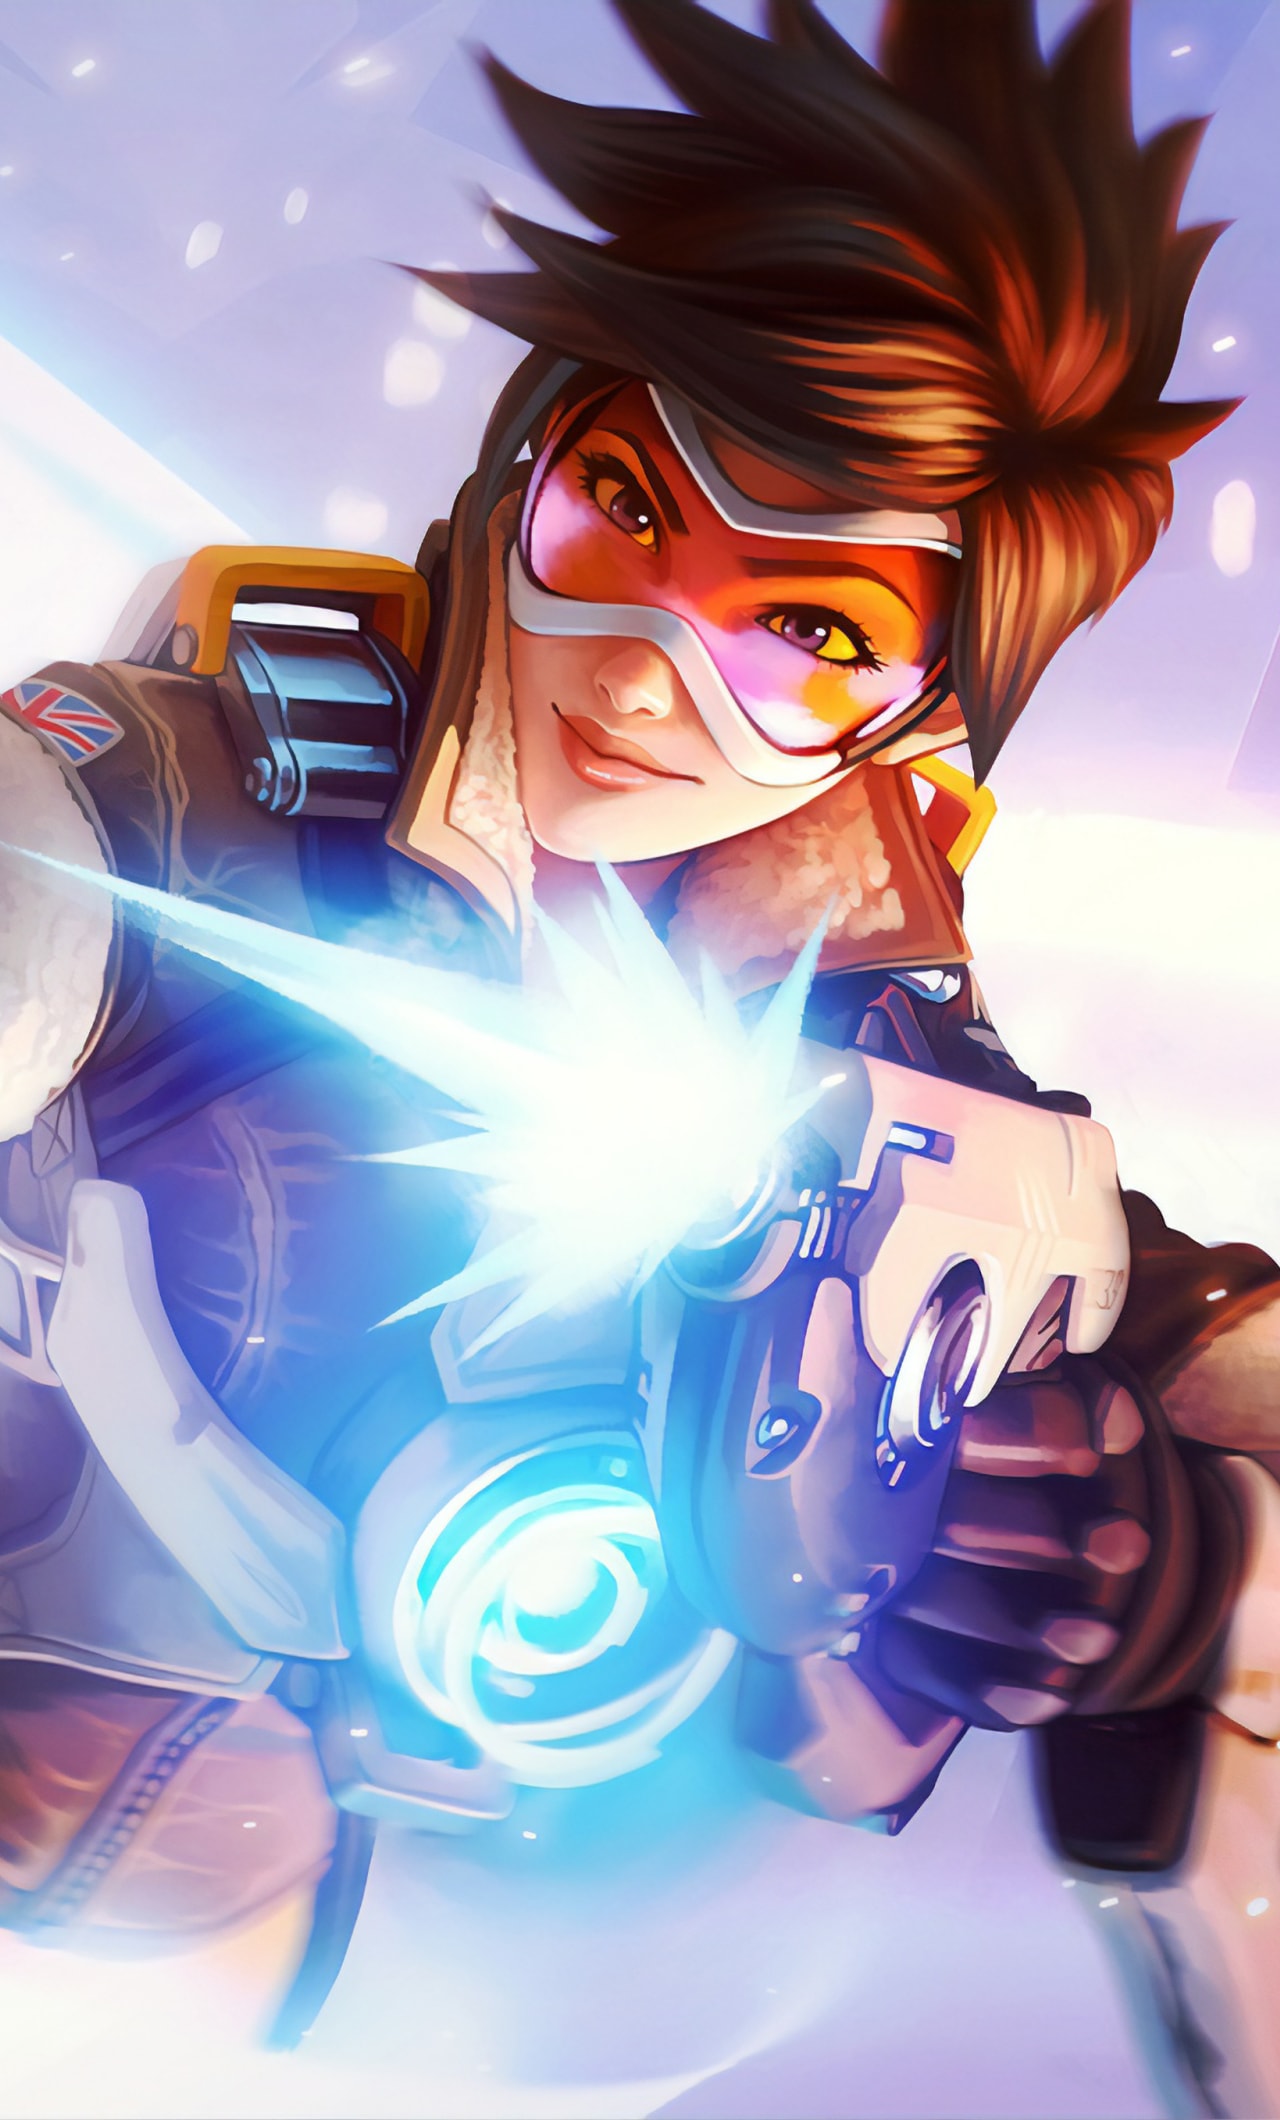 Overwatch Android